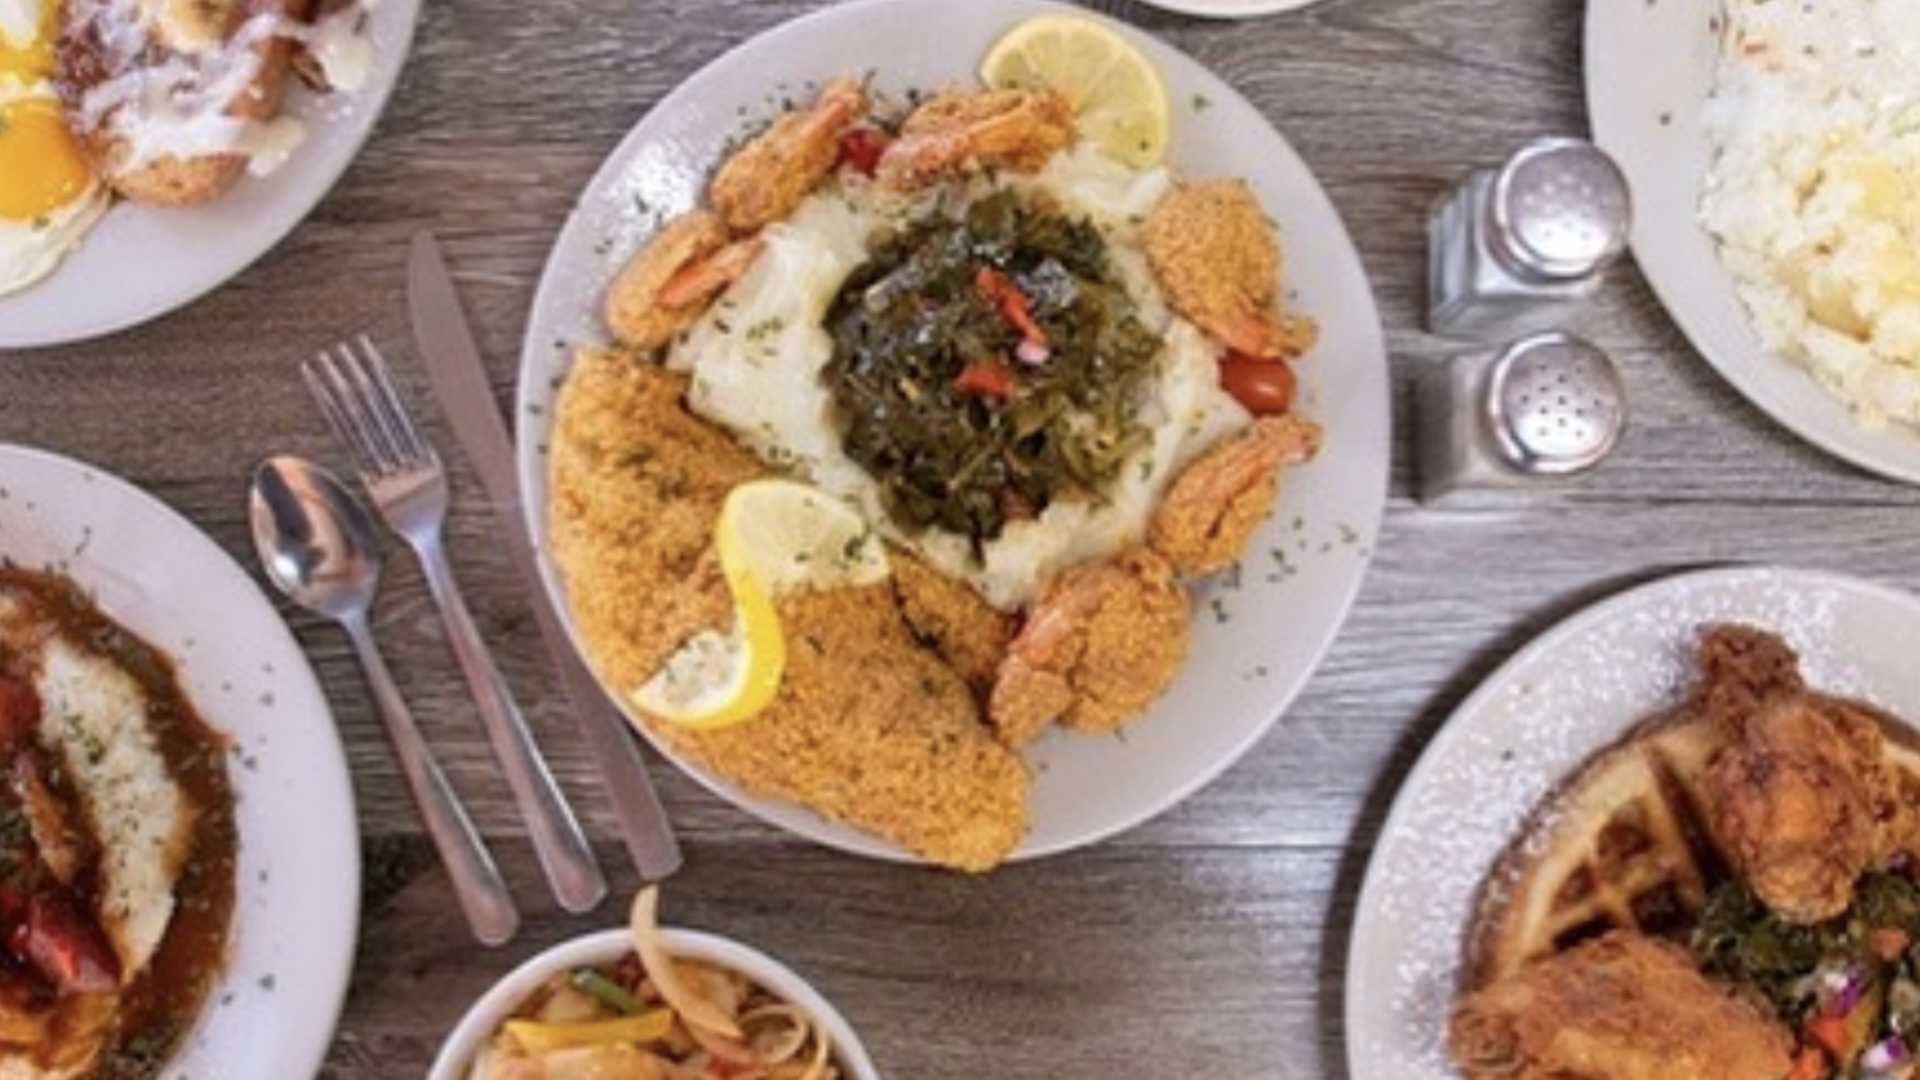 Houston This Is It Soul Food features Soul Food cuisine in Humble, Texas